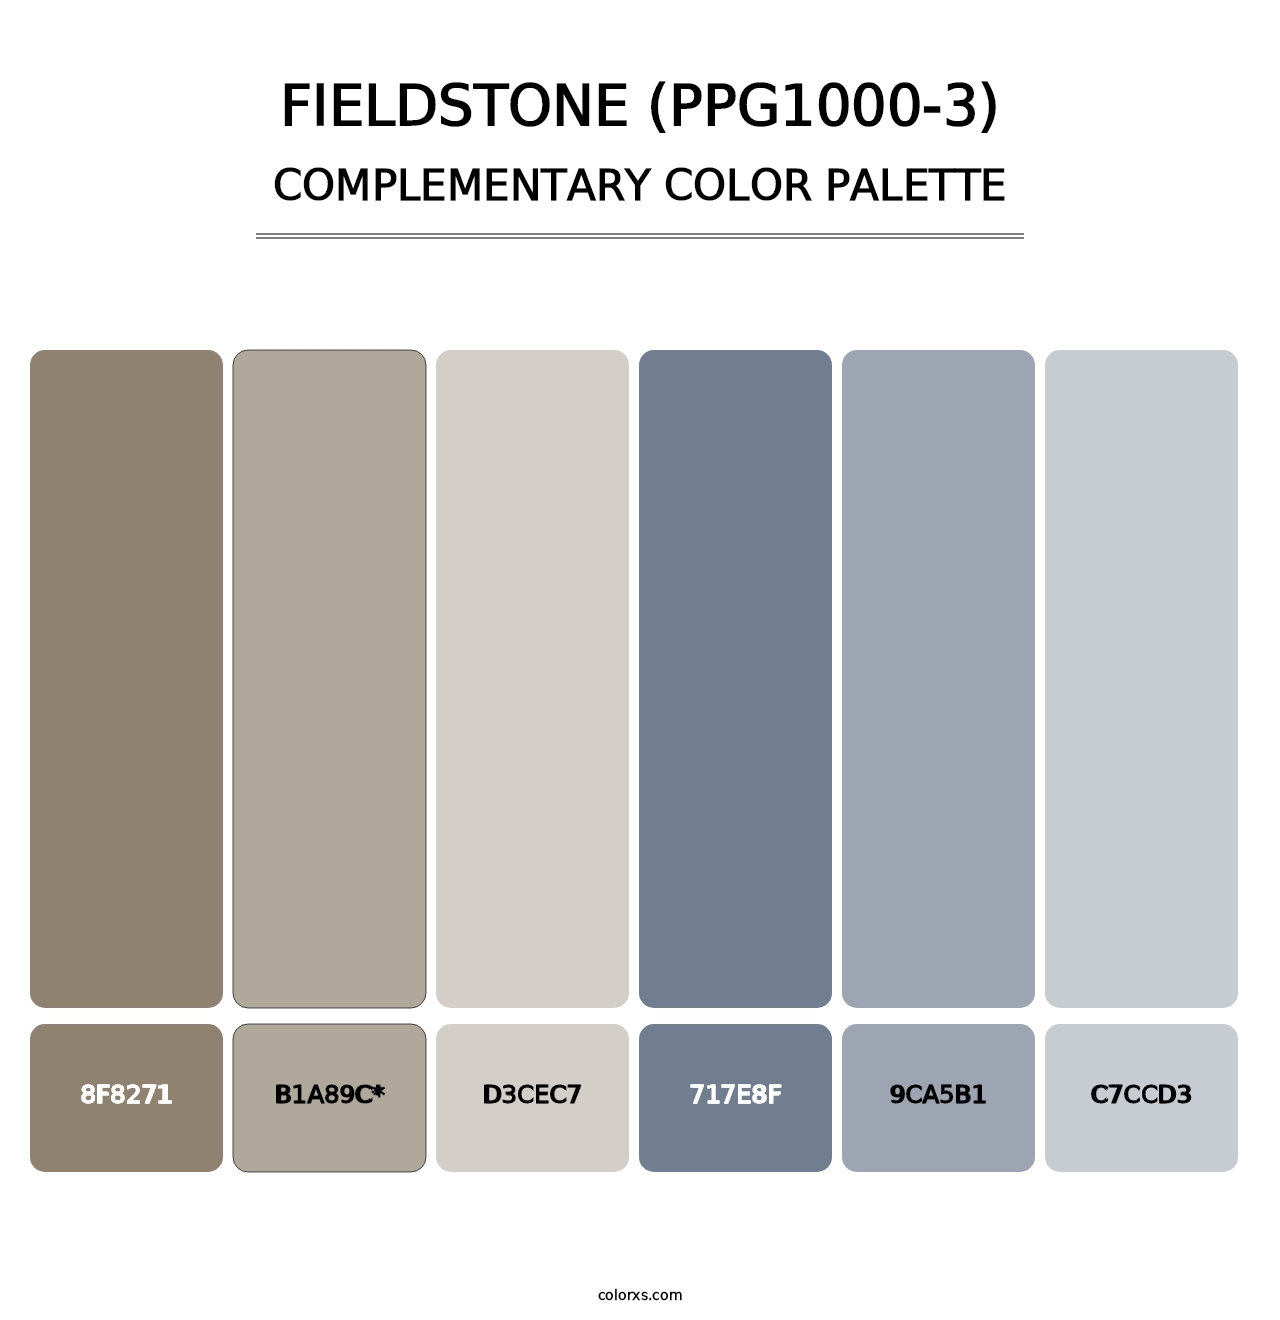 Fieldstone (PPG1000-3) - Complementary Color Palette